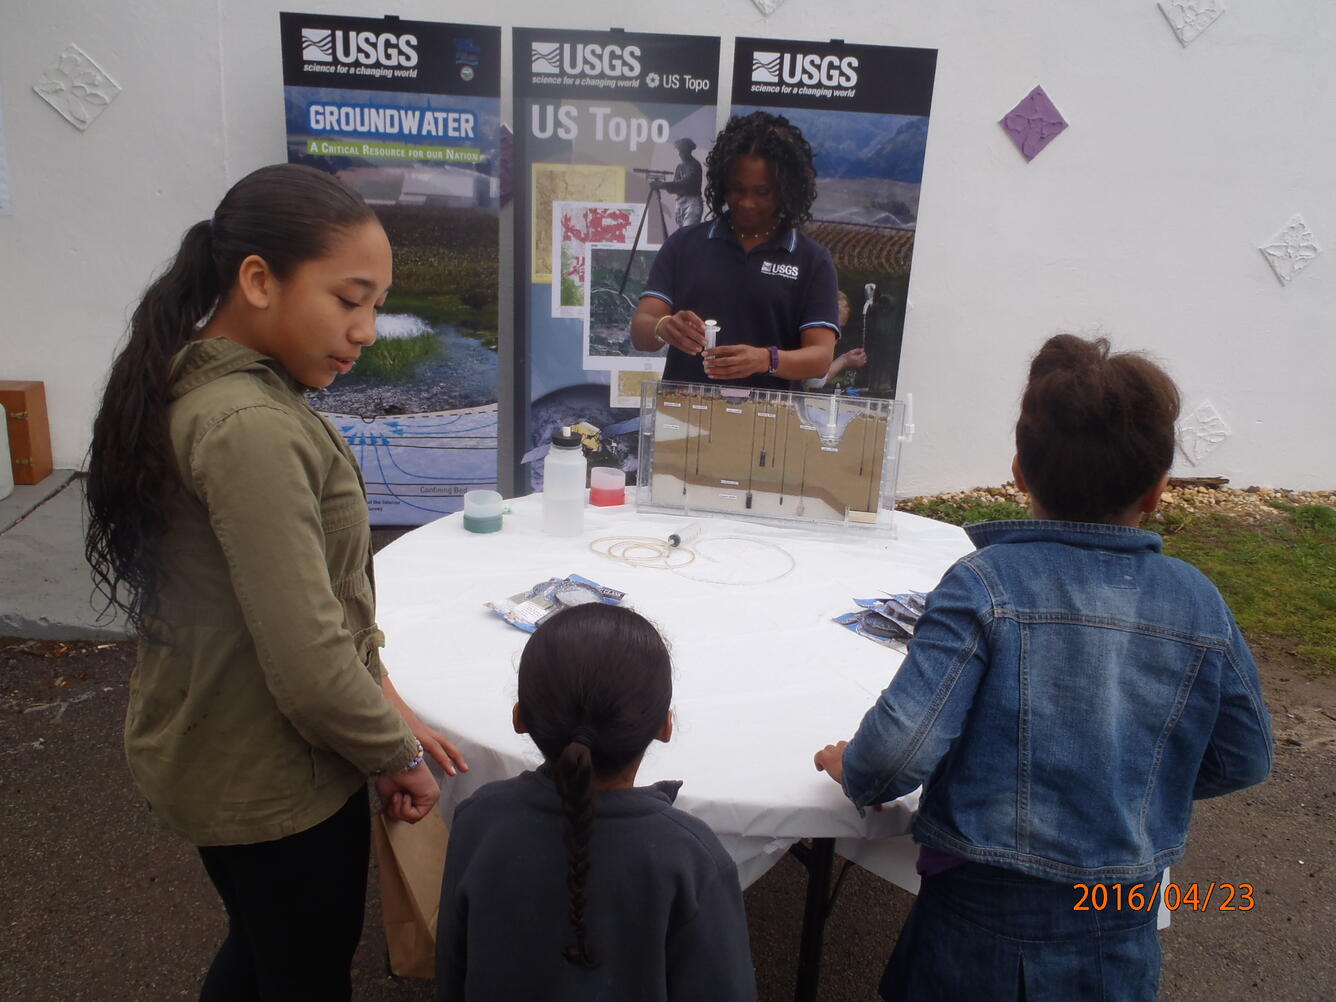 Photo of Simonette Rivera, hyrdrologic technician demonstrating ground water flow using a ground water model.